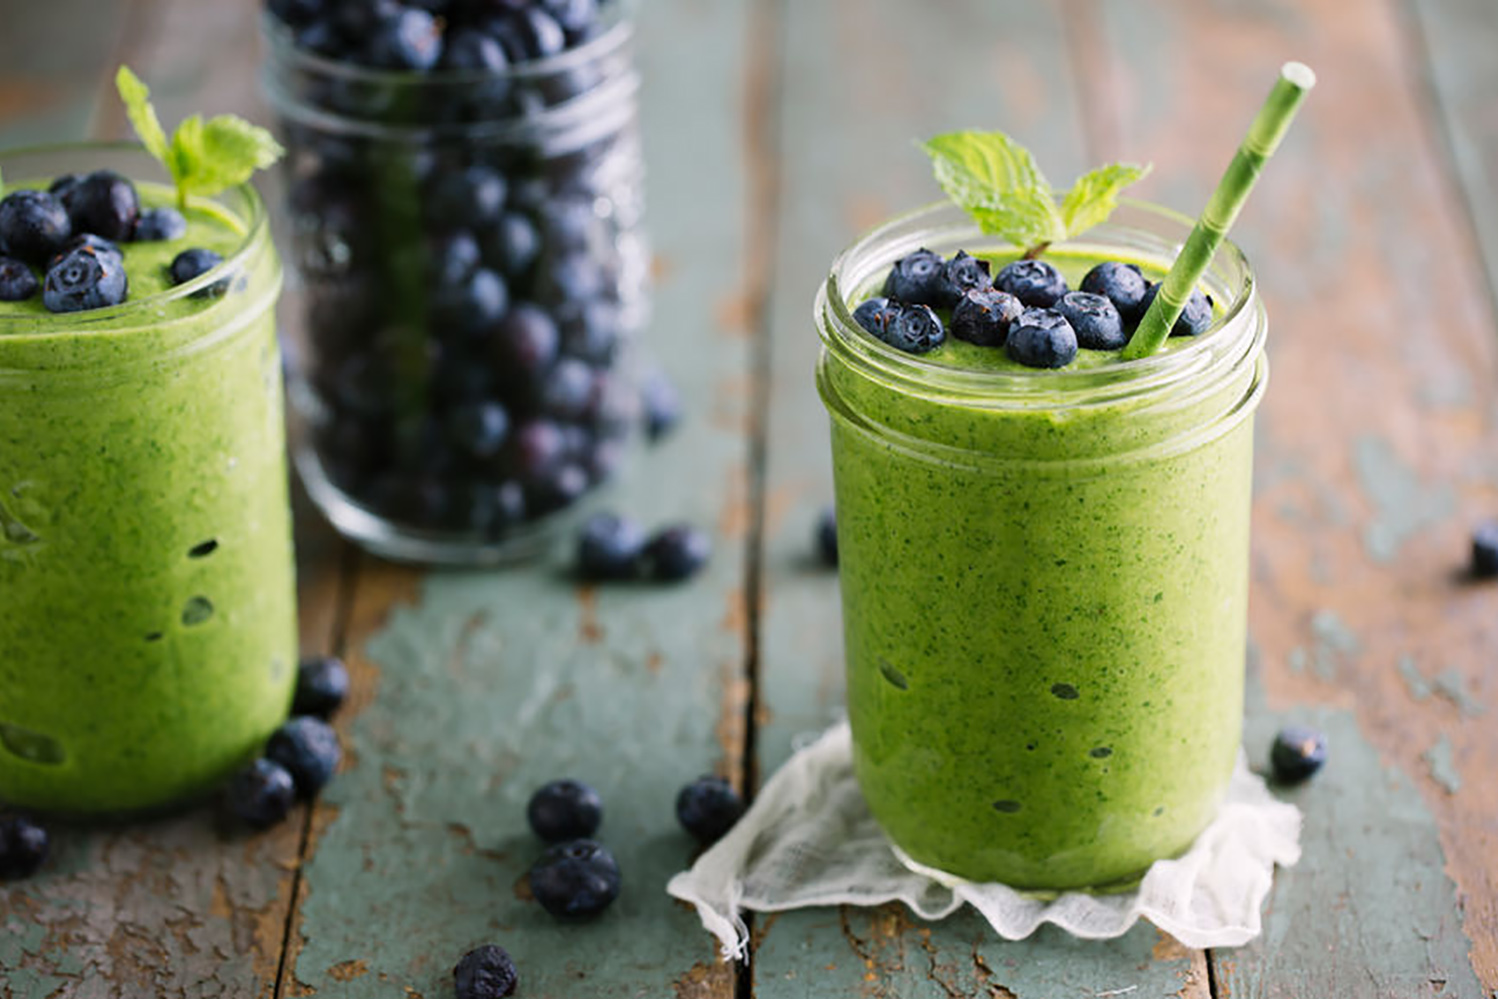 10 Best Weight Loss Smoothies - Lose Weight By Eating